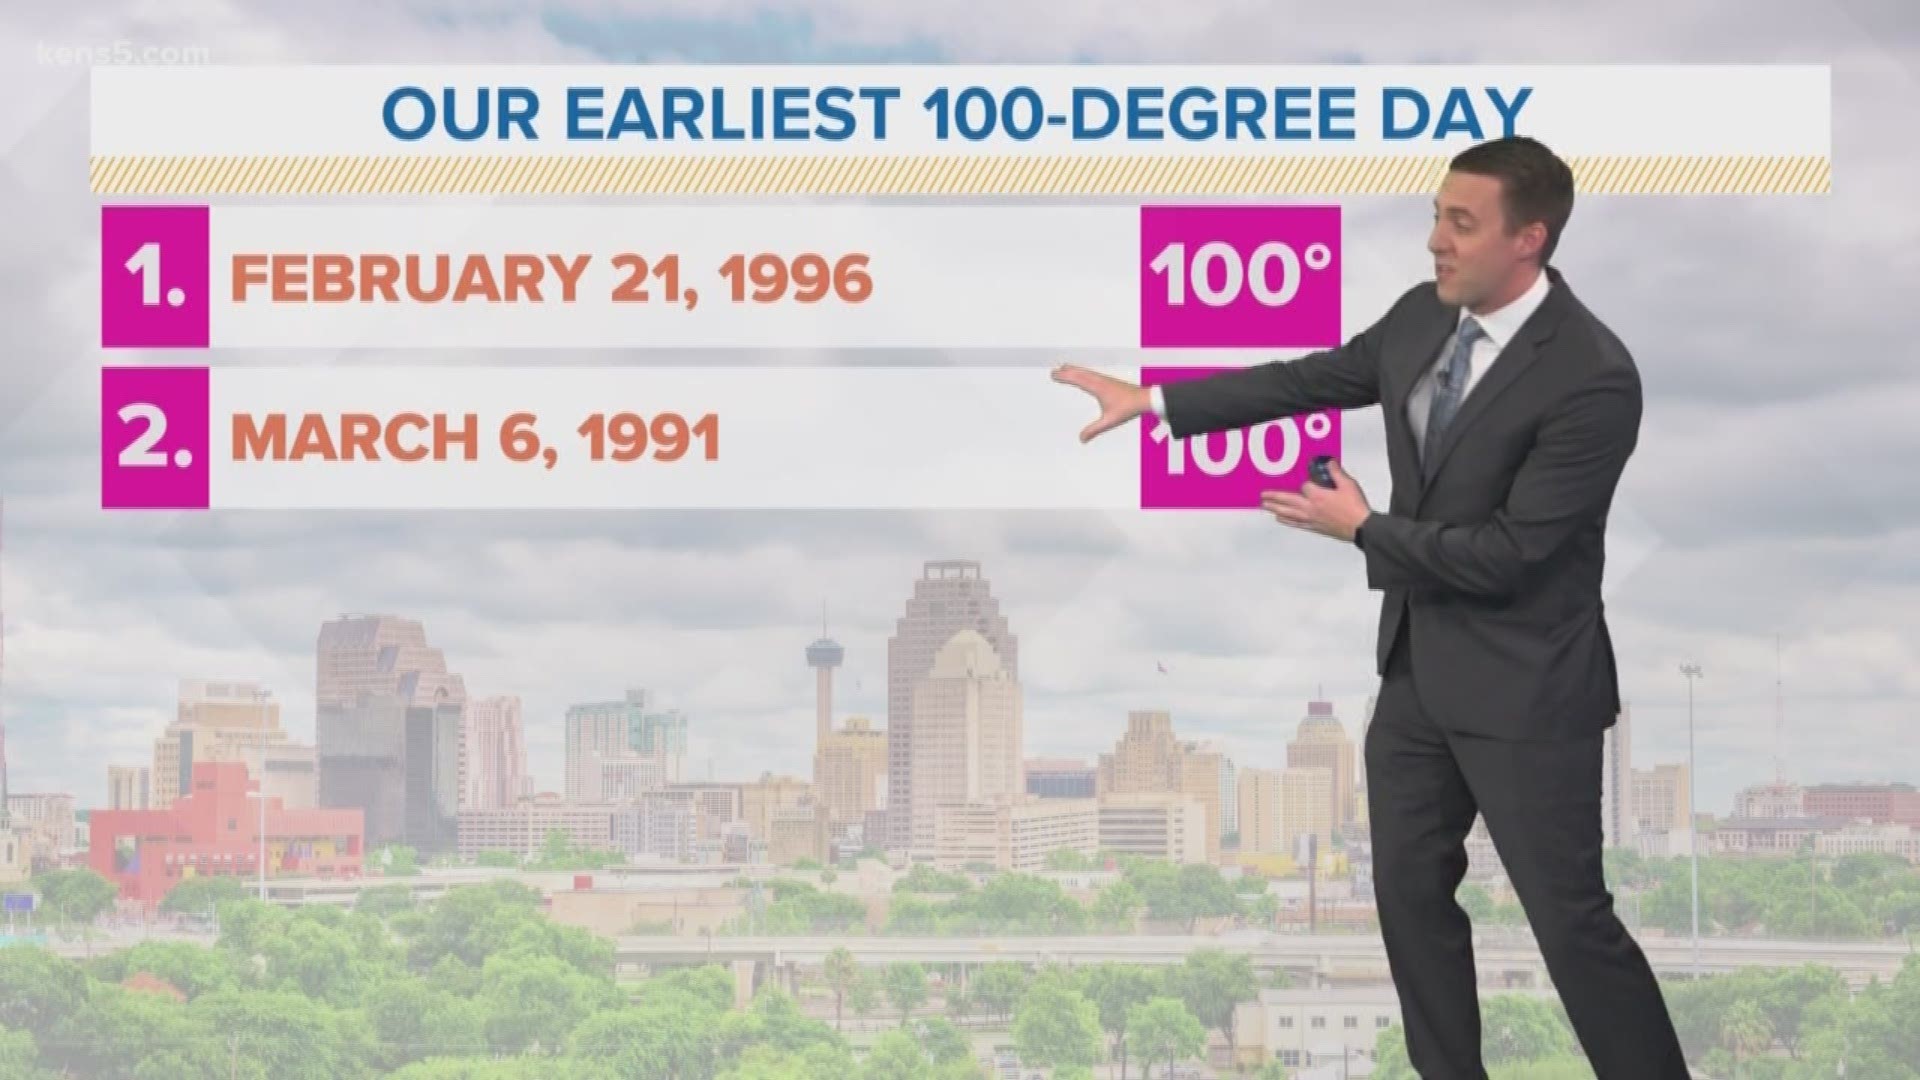 It may have been cooler this year for Feb. 21, but back in 1996 the temperatures broke the triple digits.